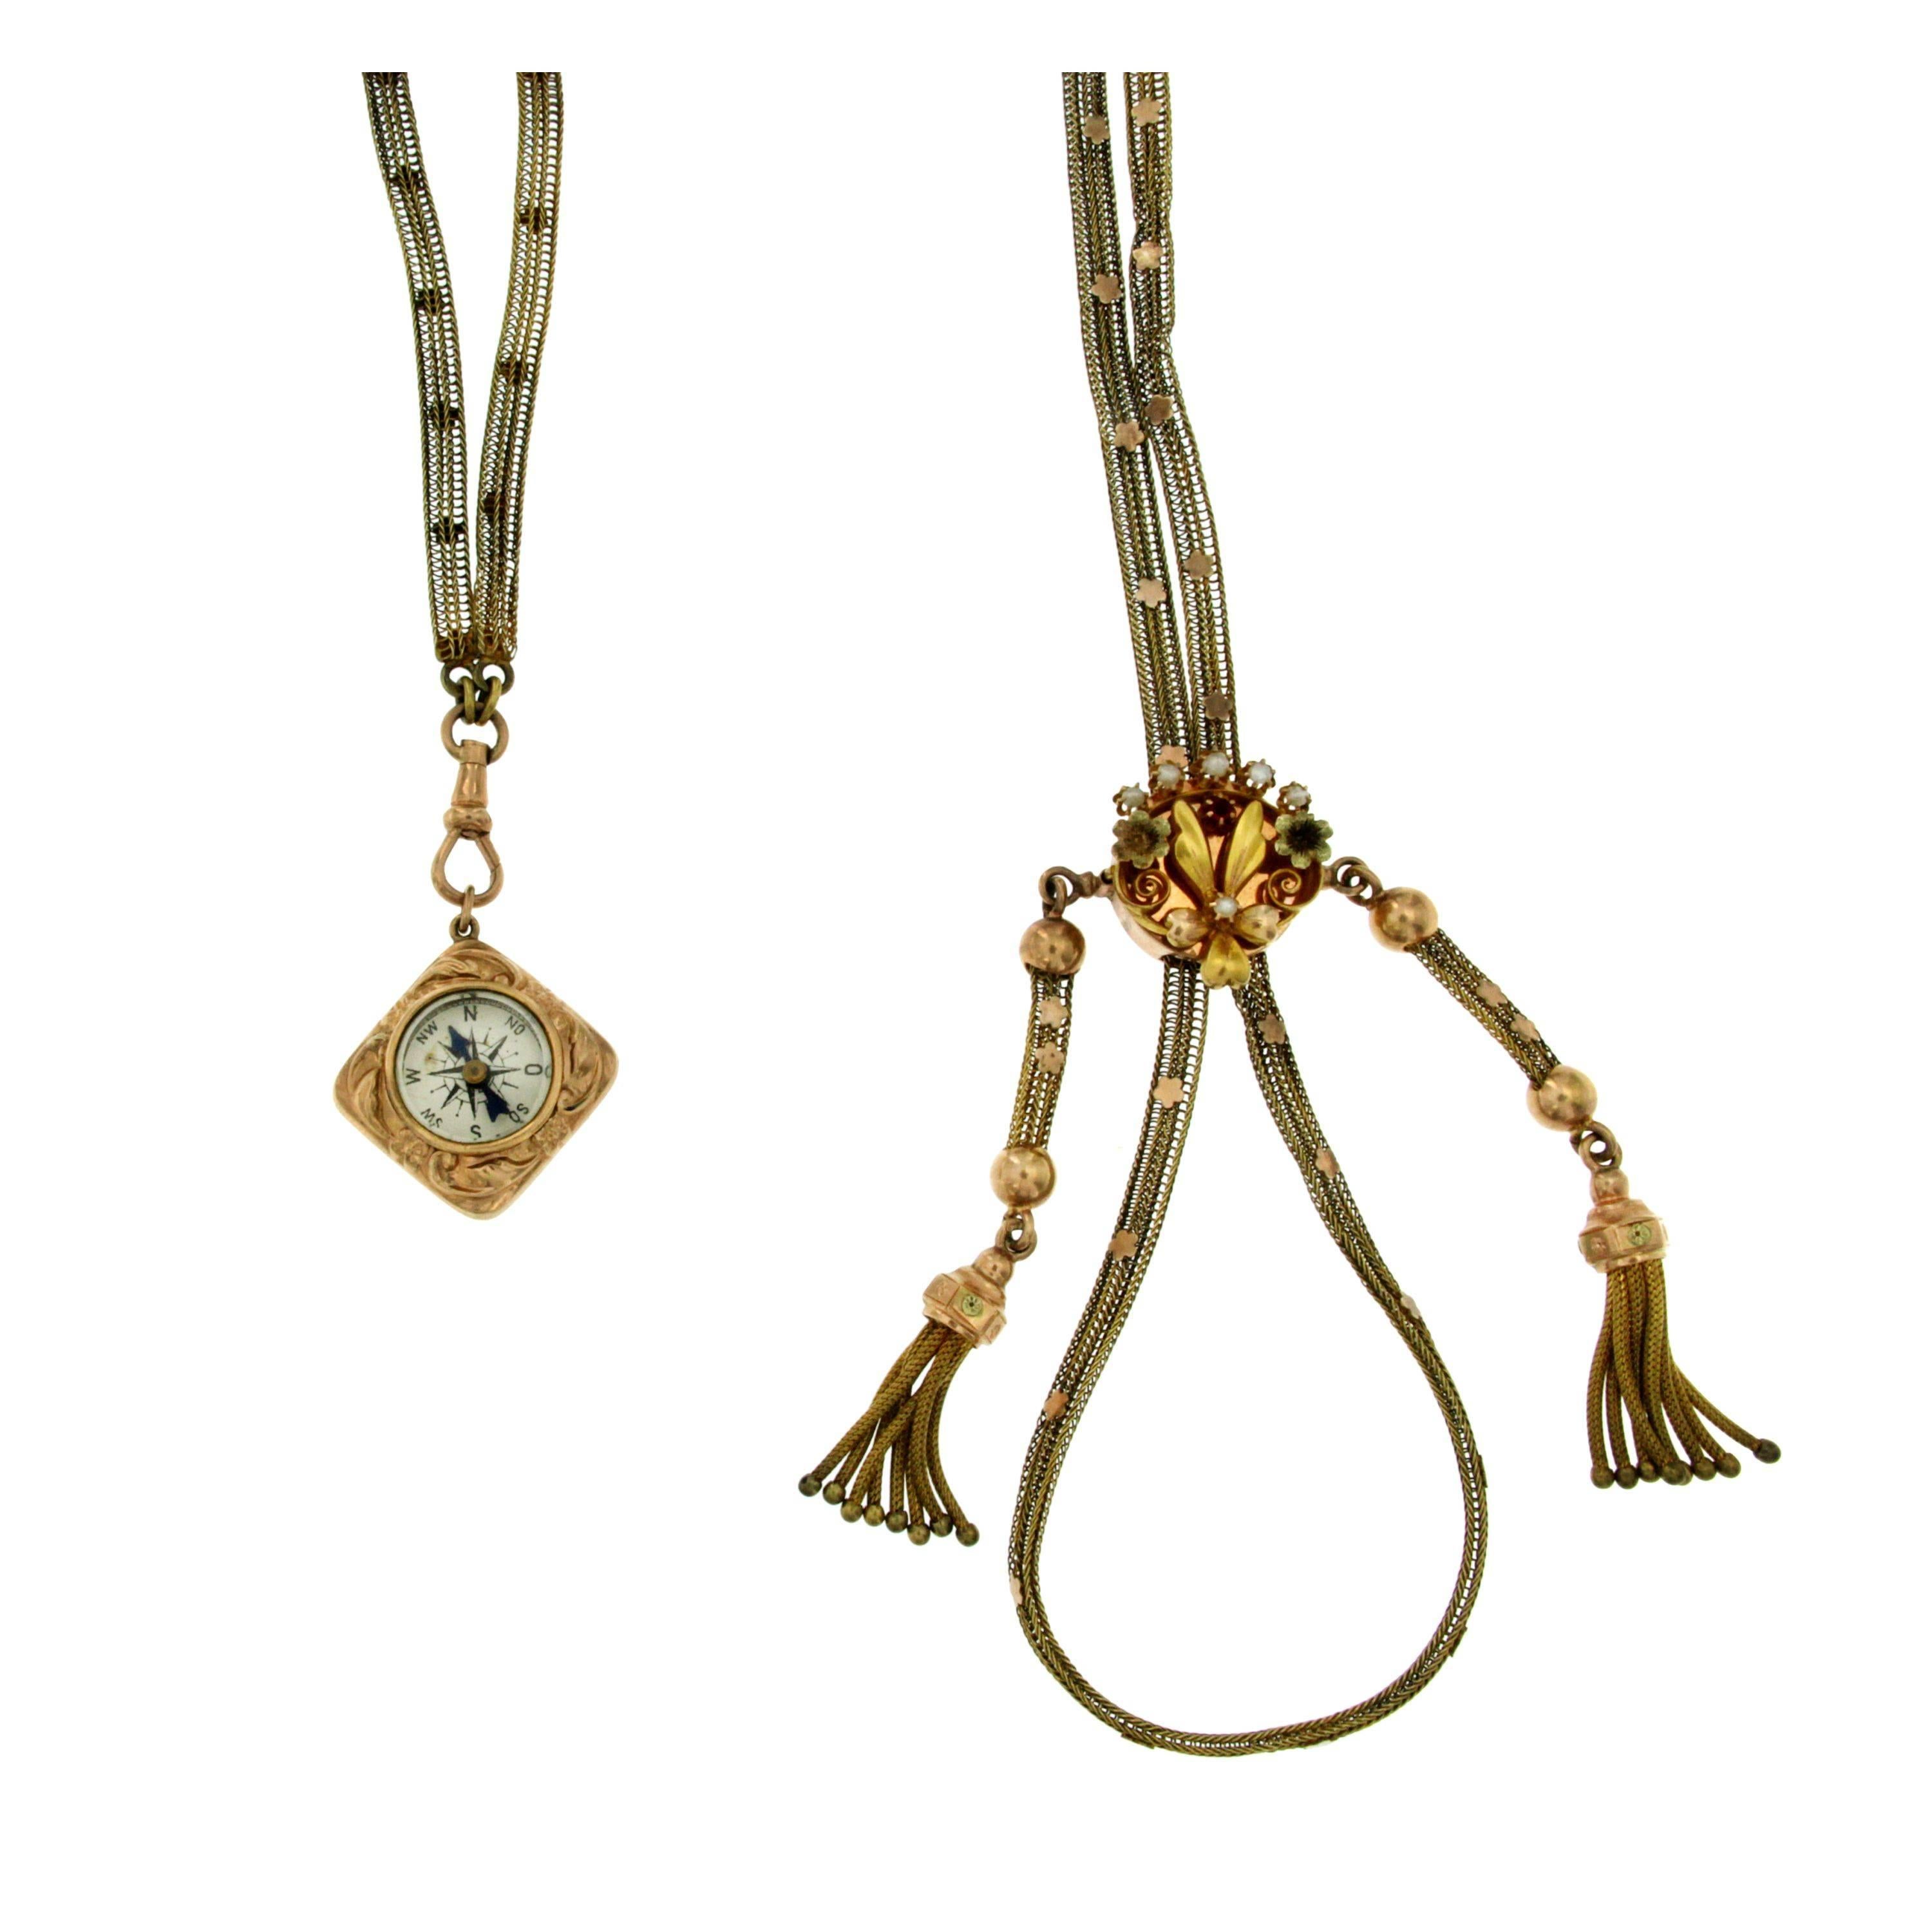 Antique Bourbon necklace from Italy XIX Century.
Totally handcrafted in the traditional way in 12k gold and set with small pearls  semi precius stone, gold leaves. 
One pendant going up and down the chain, the other pendant is a reversible compass